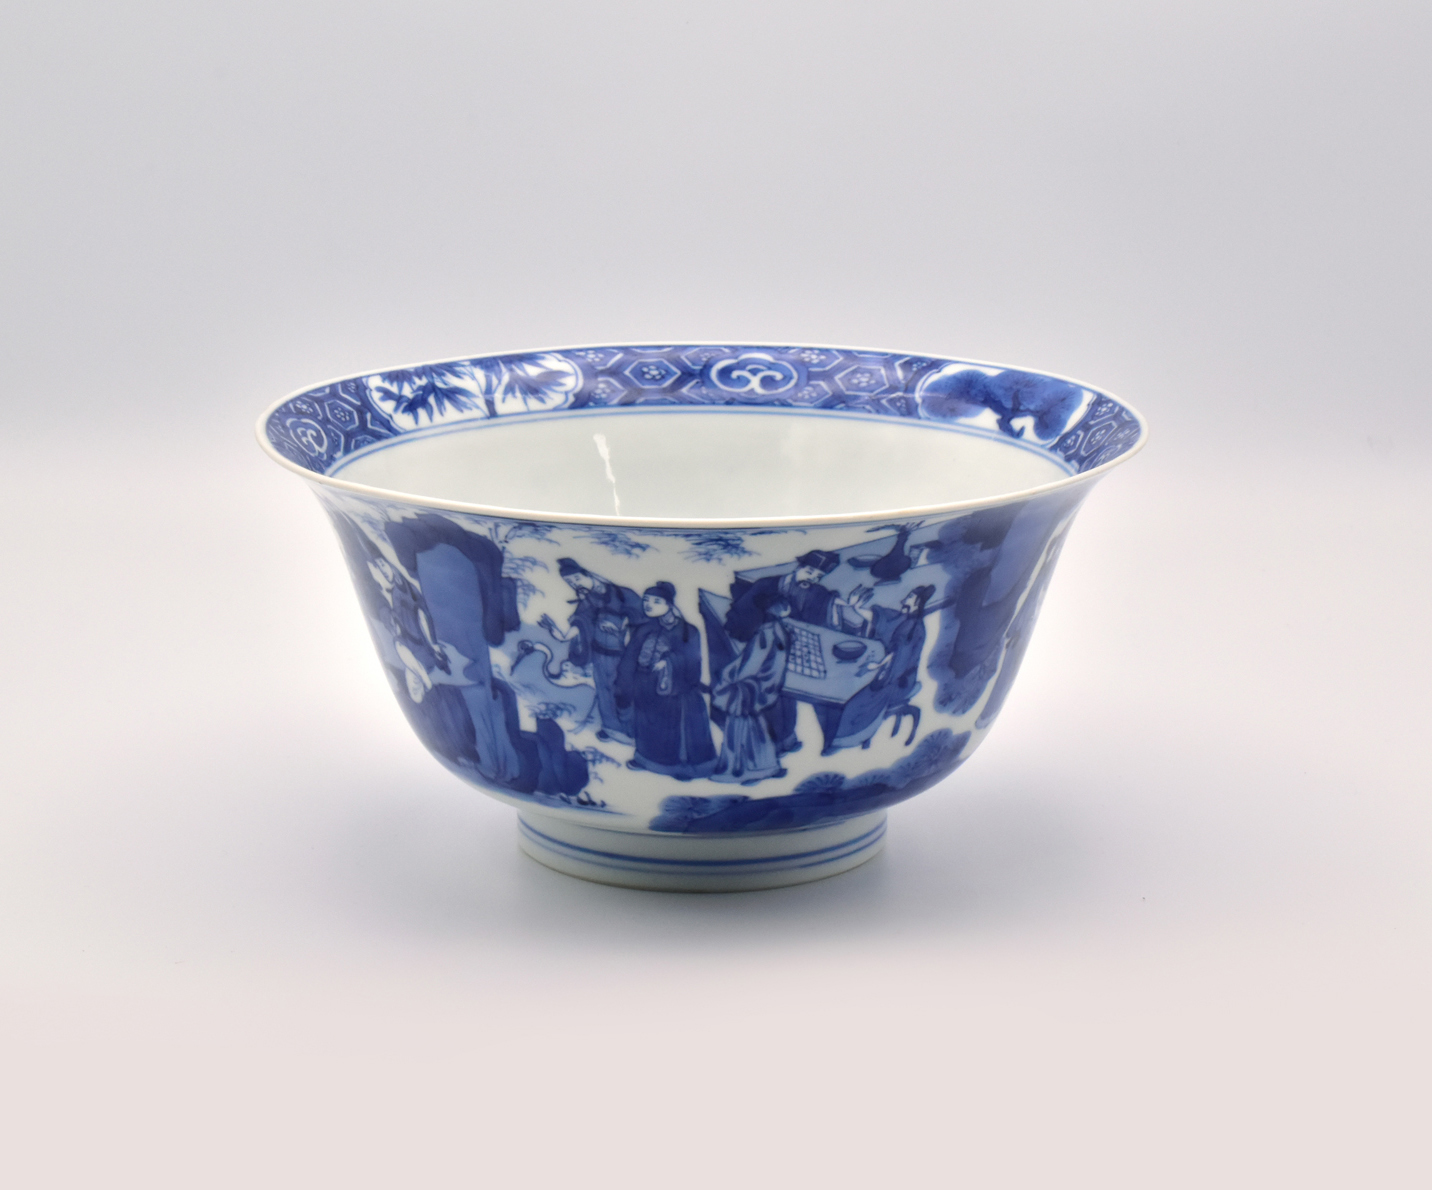 A GOOD CHINESE BLUE AND WHITE PORCELAIN ‘EIGHTEEN SCHOLARS’ BOWL, KANGXI PERIOD, 1662 – 1722 - Image 2 of 22